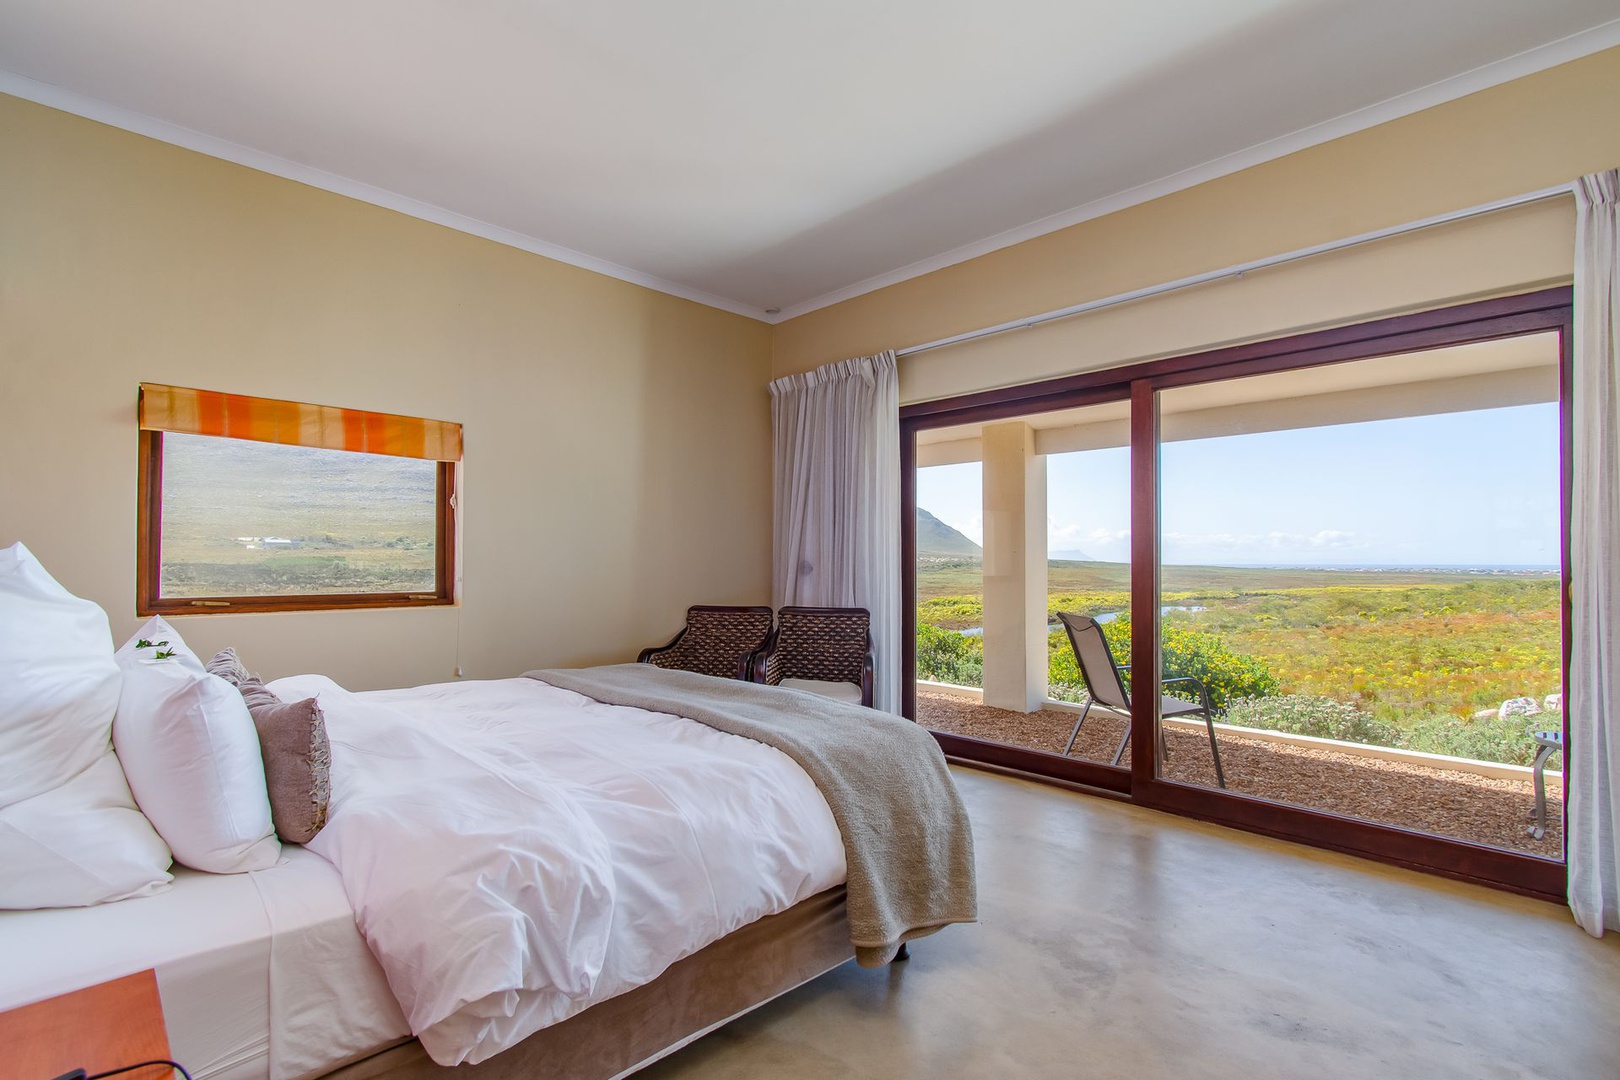 House in Pringle Bay Rural - Kingsized bed with a sea view